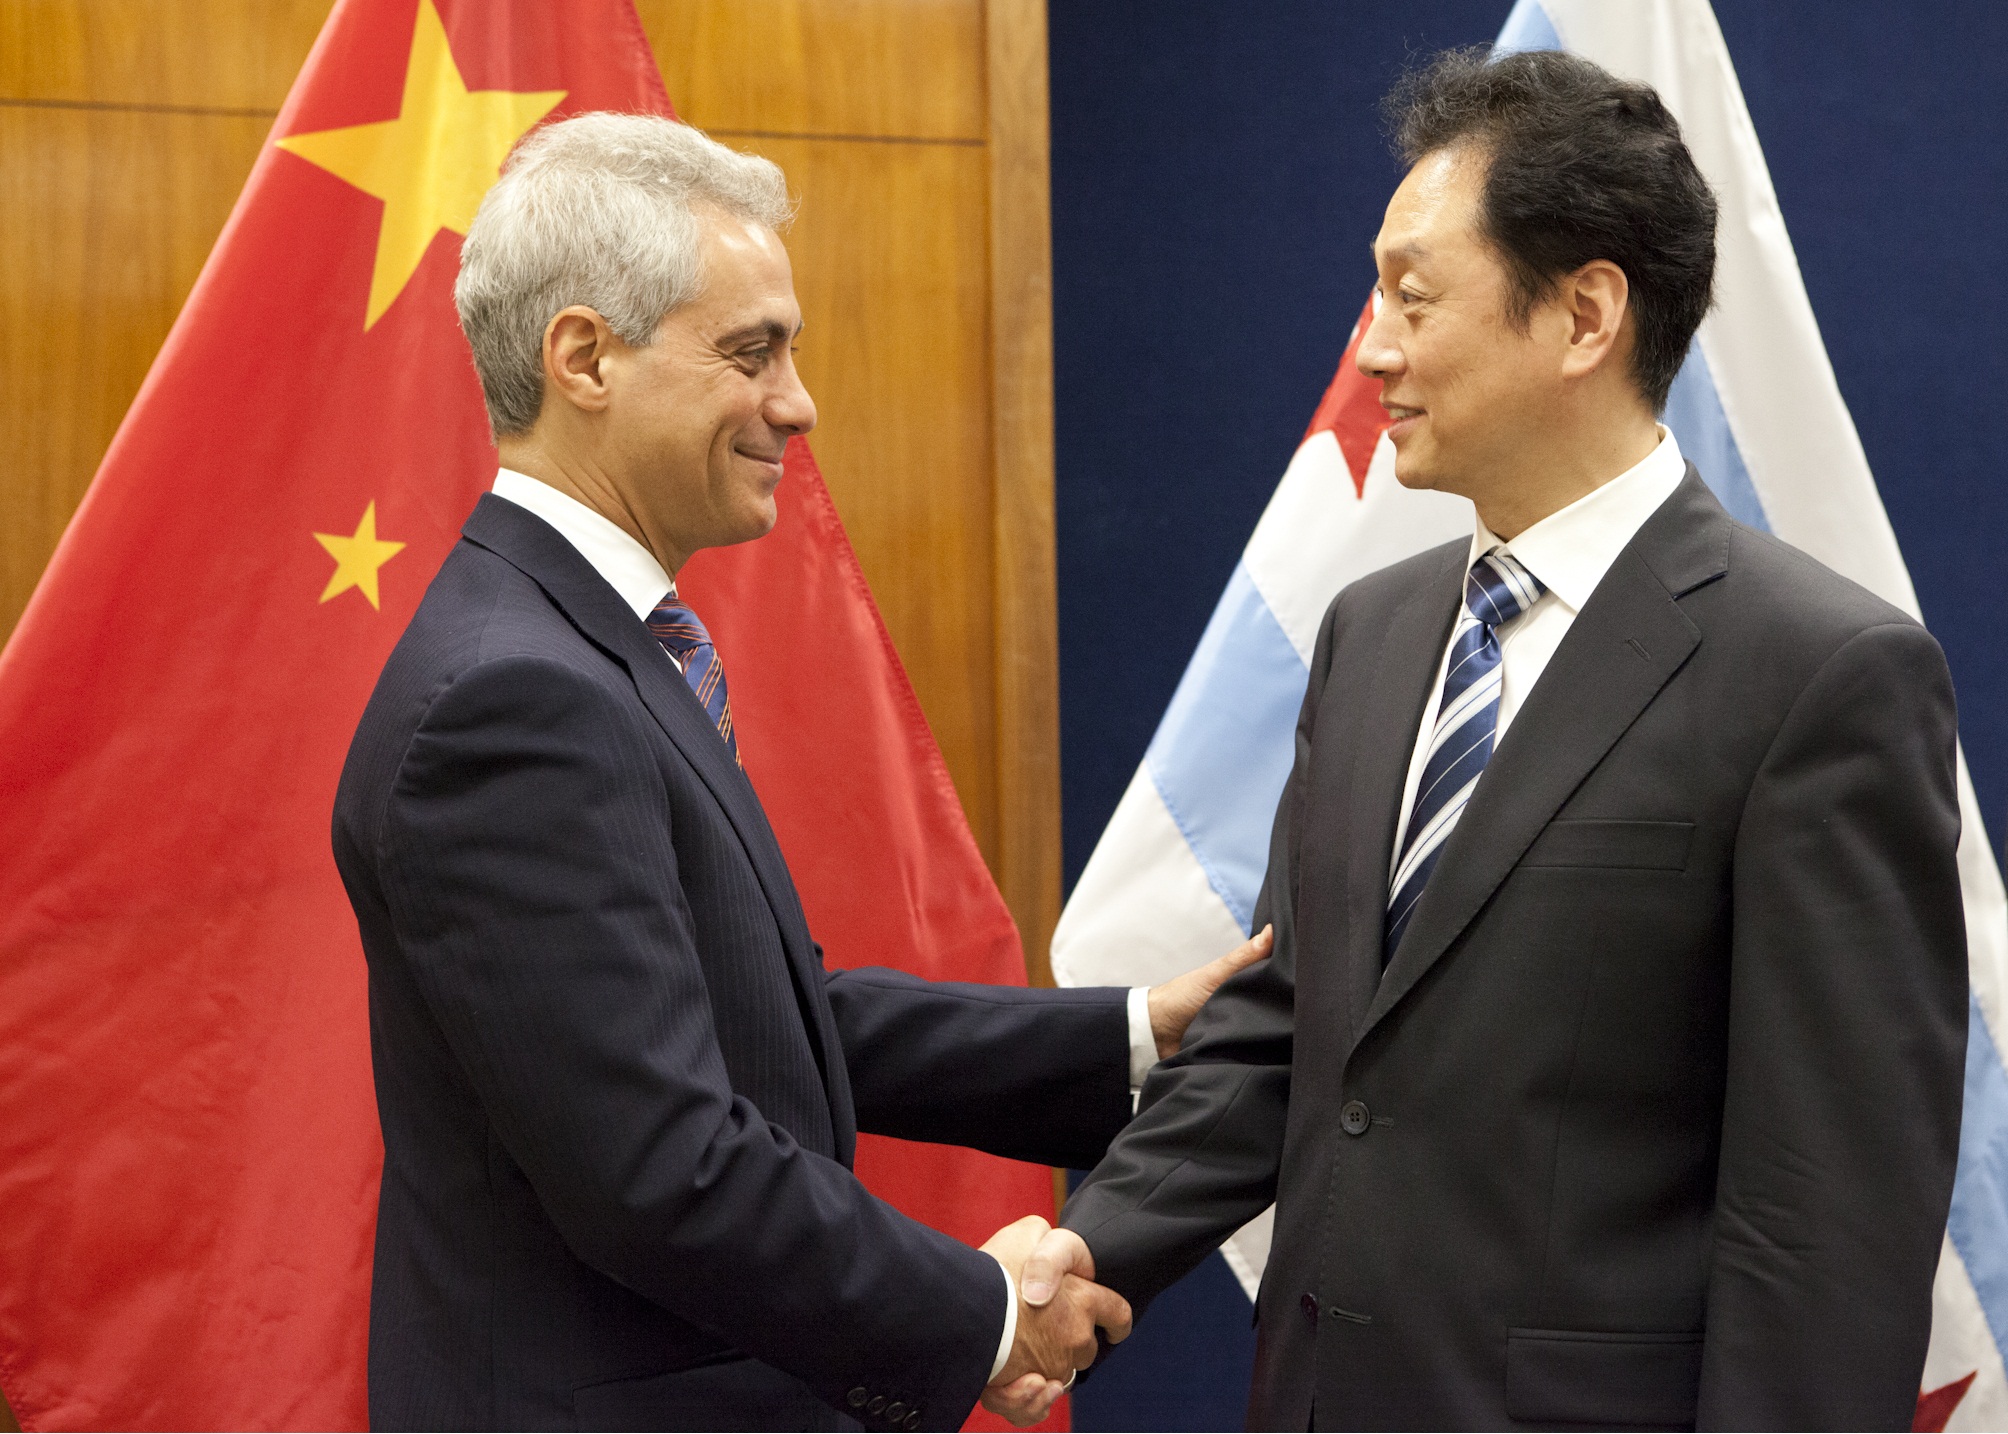 Mayor Emanuel welcomes to Chicago Mr. Wang Chao, Vice Minister of Commerce for the People’s Republic of China.  Photo Credit: Brooke C